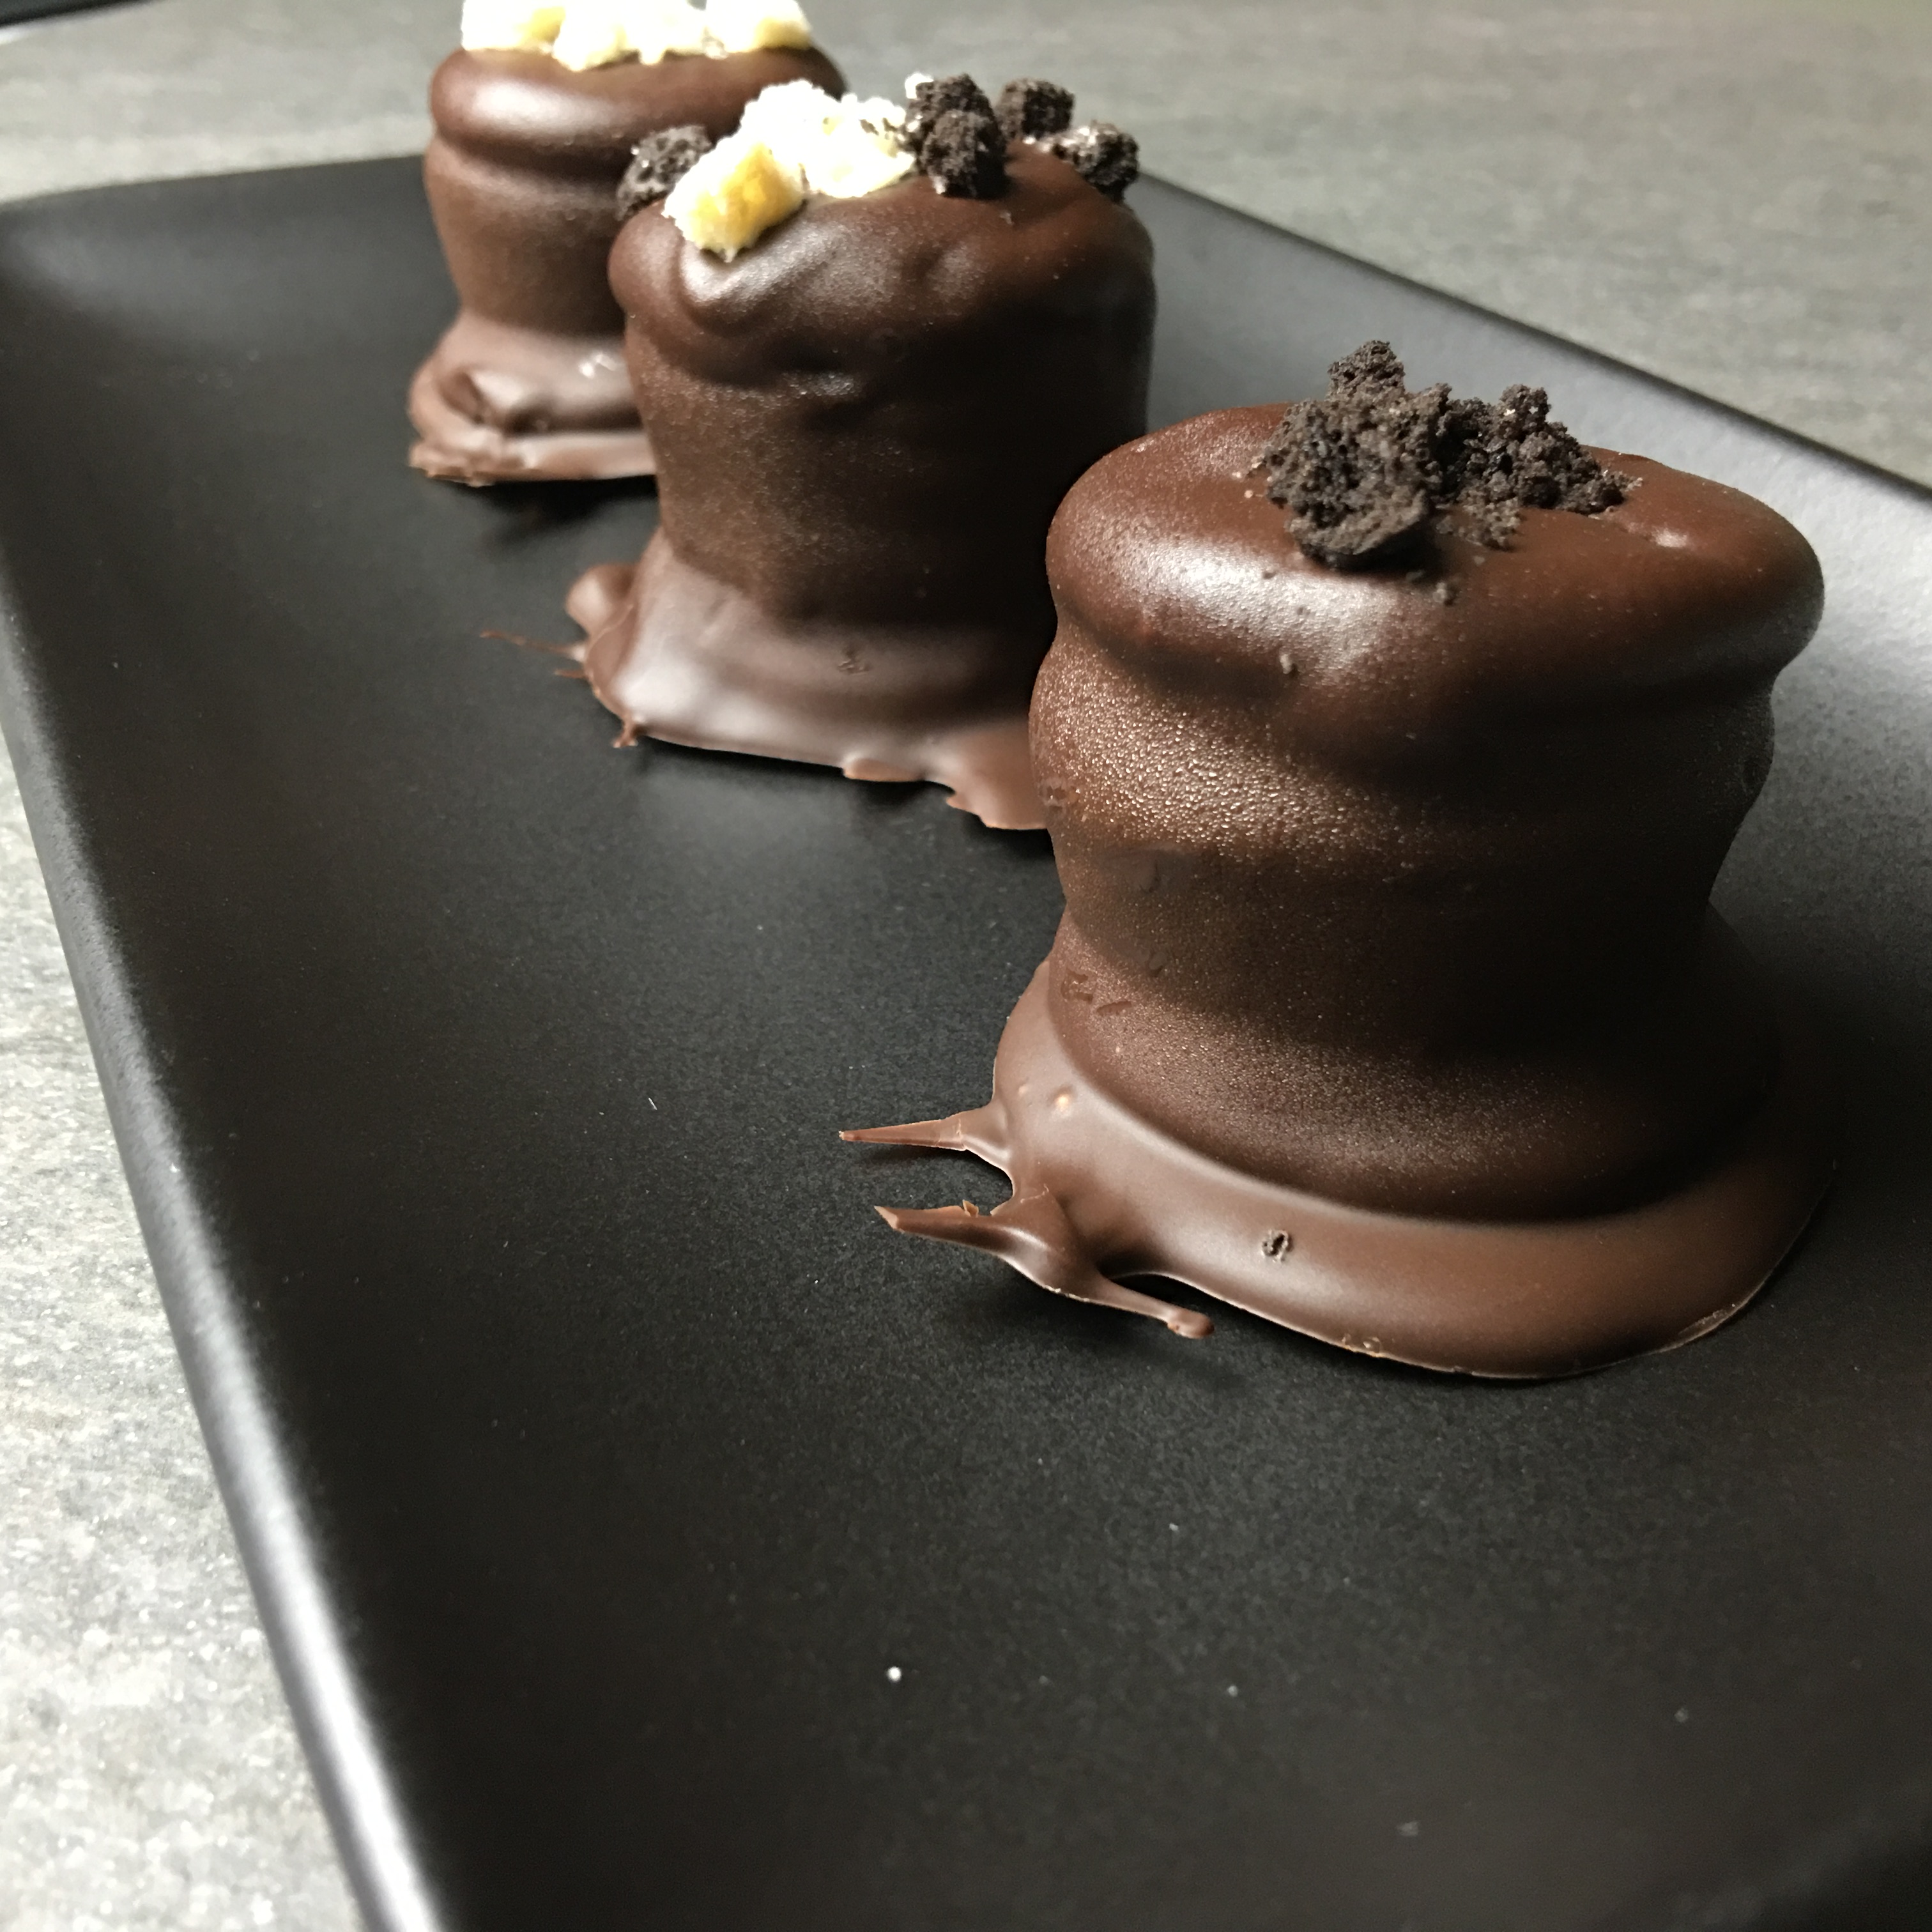 Sun Butter Chocolate Cups and Creme Cookie Treats by The Allergy Chef